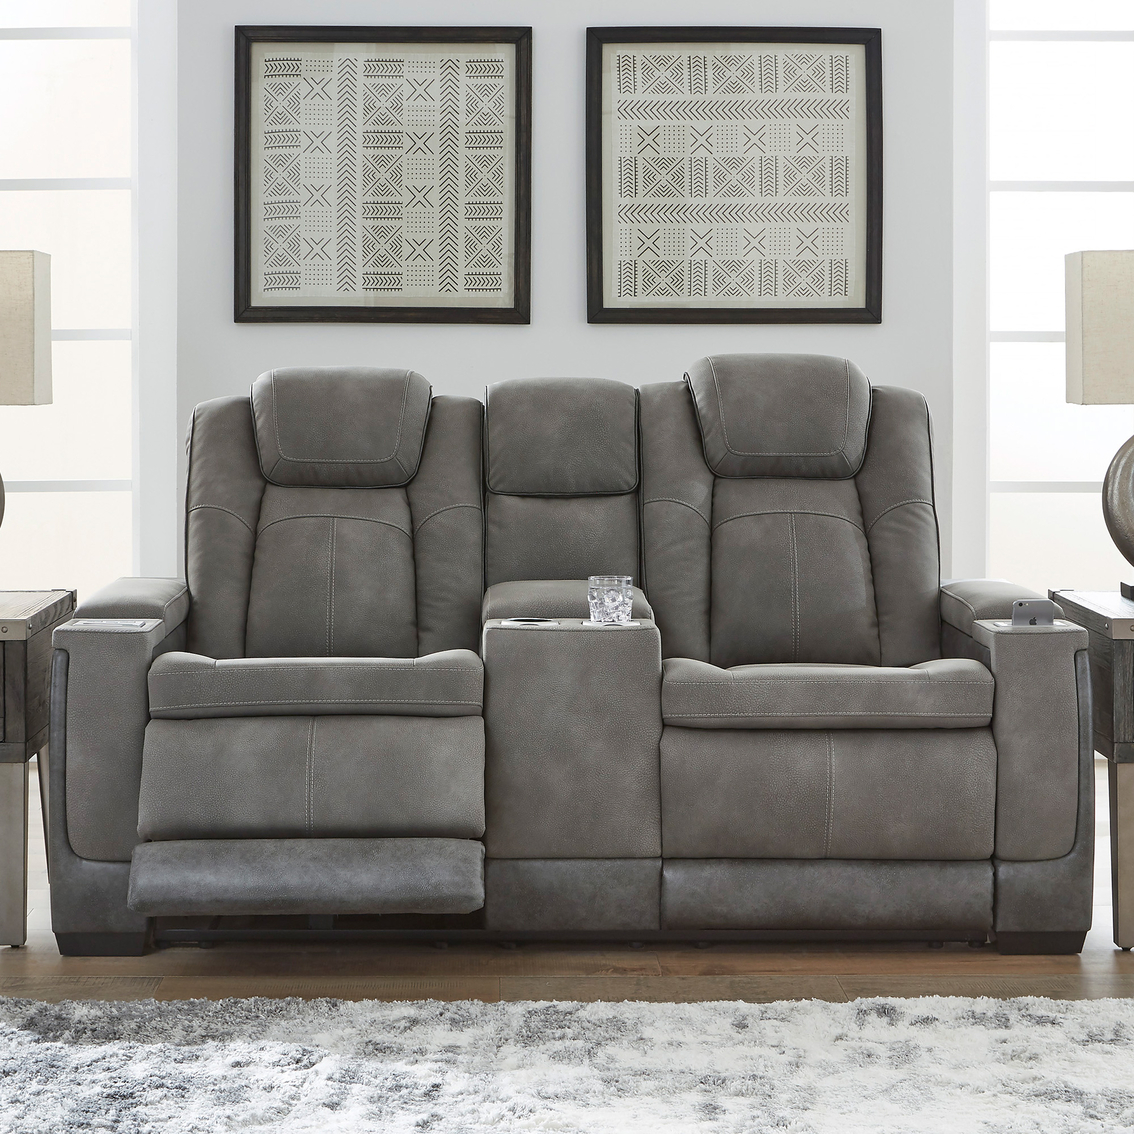 Signature Design by Ashley Next Gen DuraPella Power Reclining Loveseat with Console - Image 5 of 10